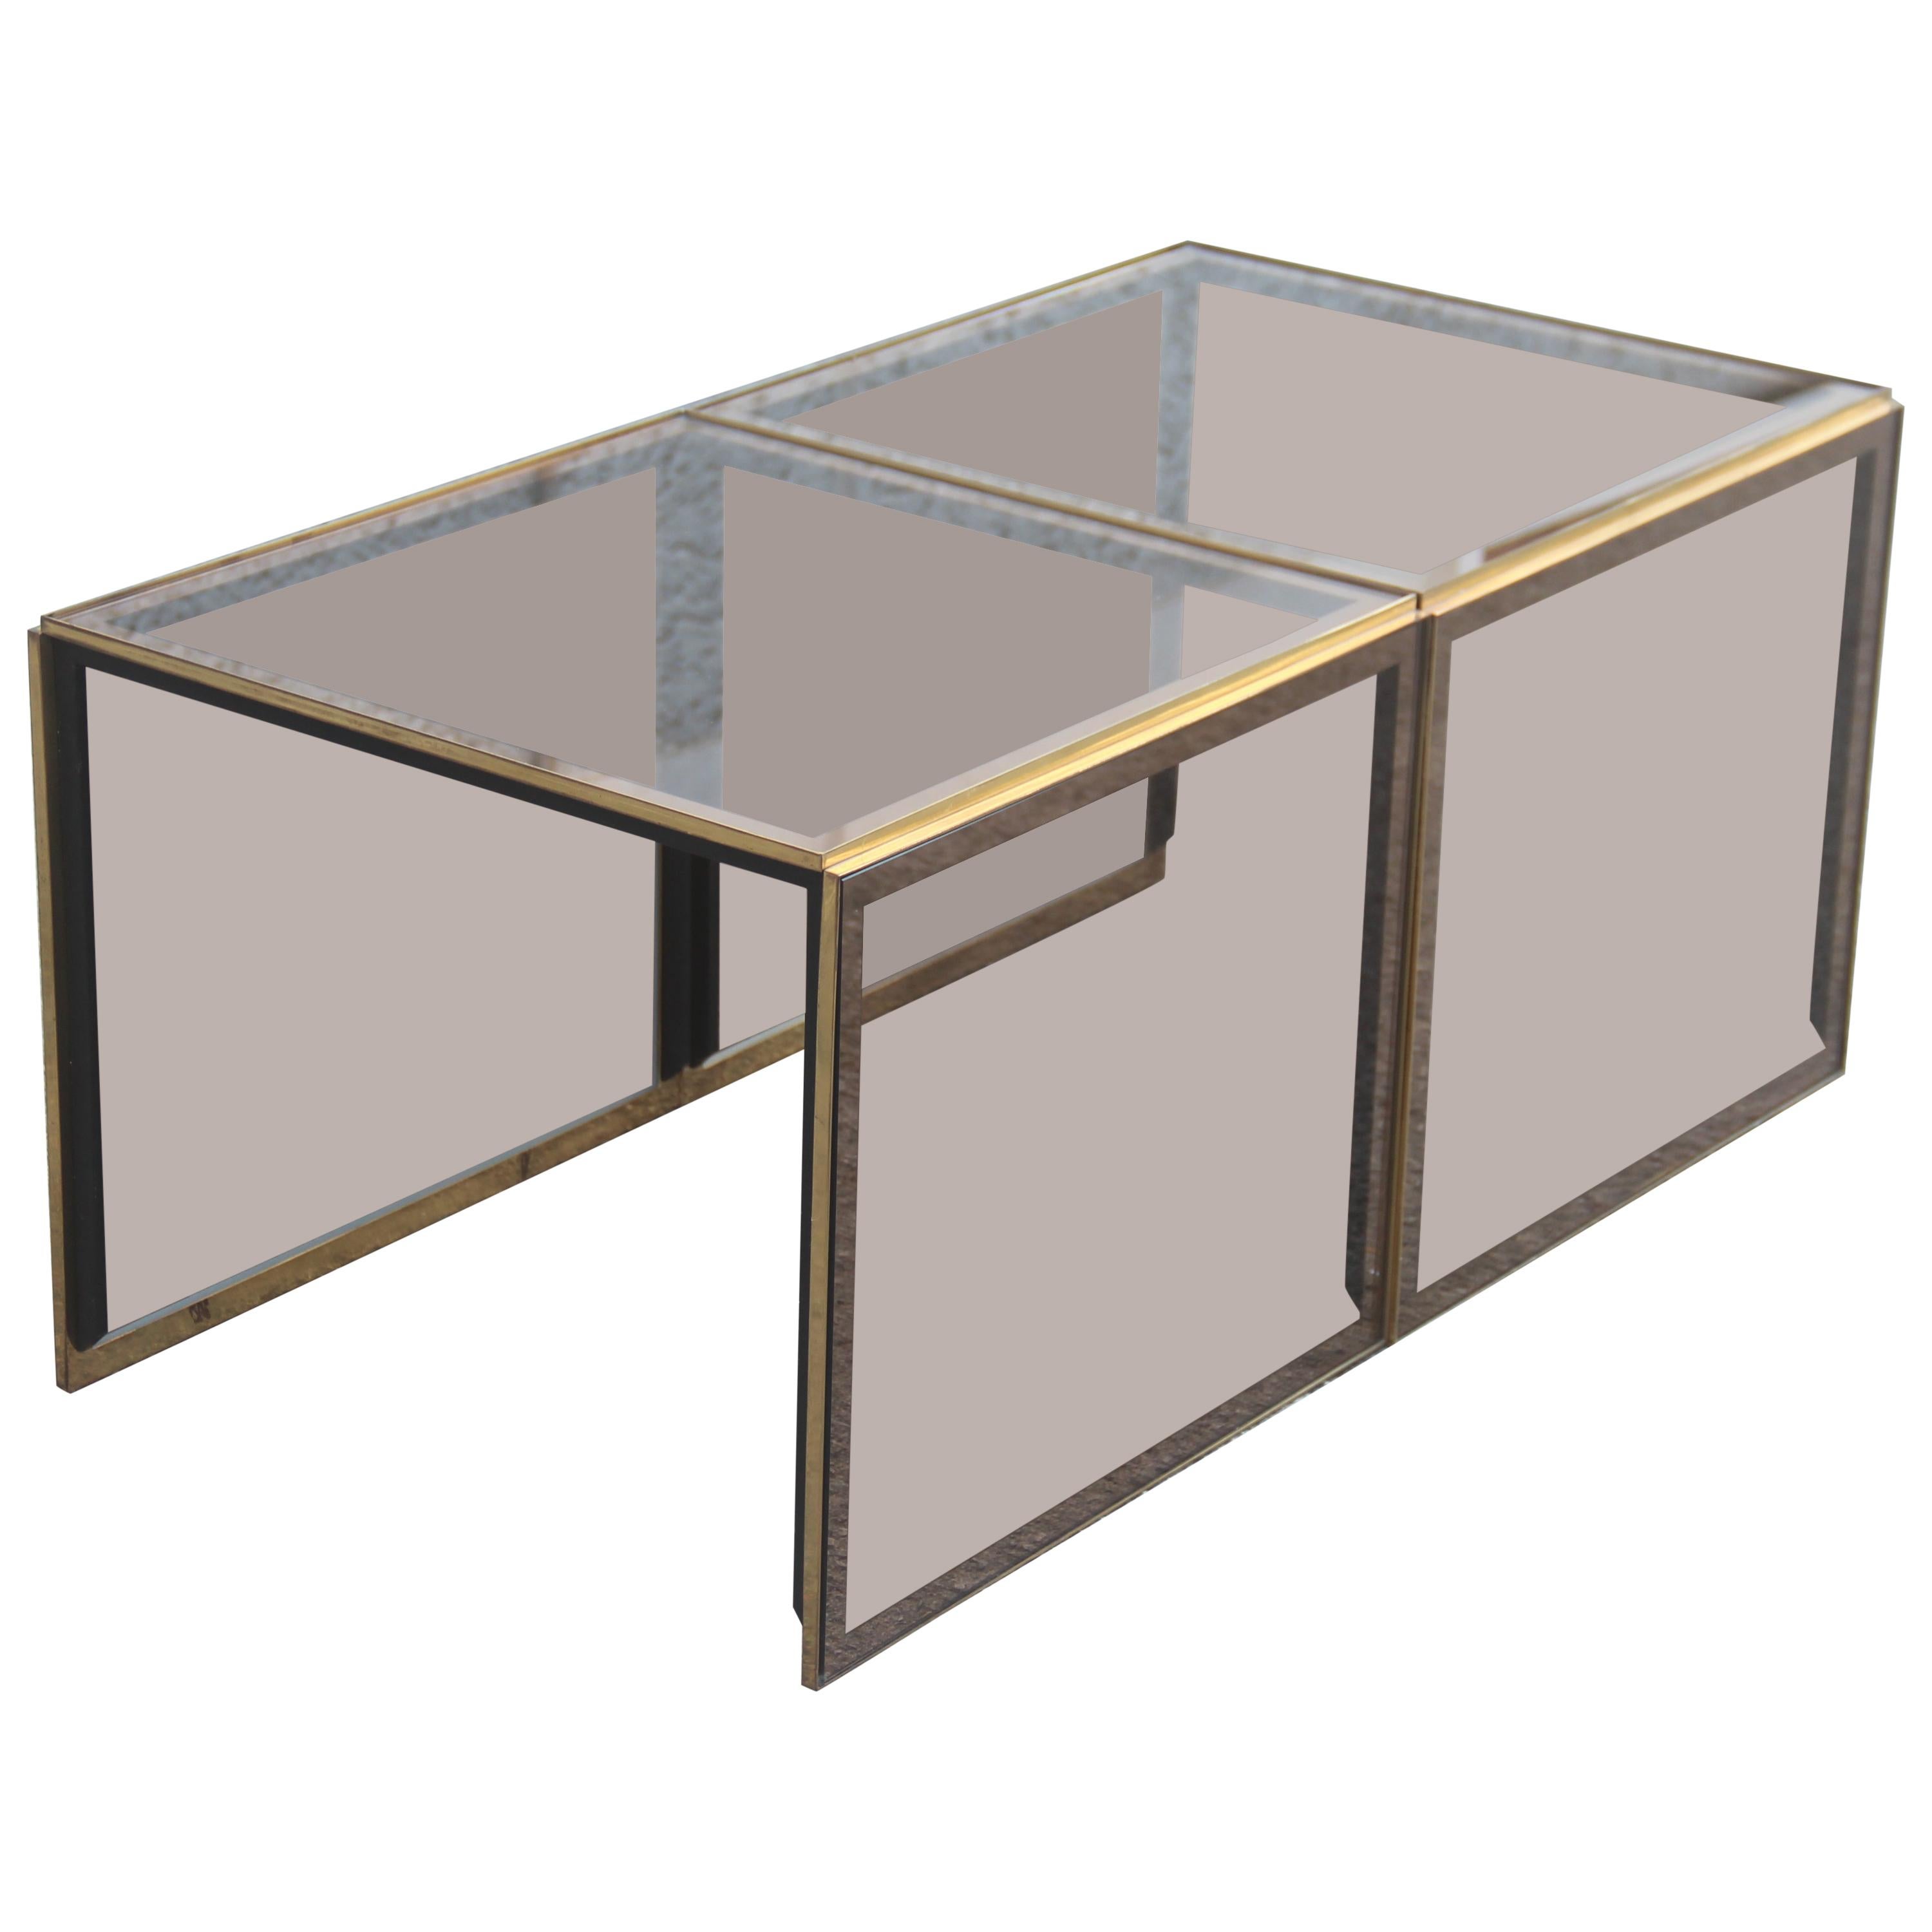 Stackable Coffee Tables in Mirrored Golden Brass Glass with a Square Shape 1970s For Sale